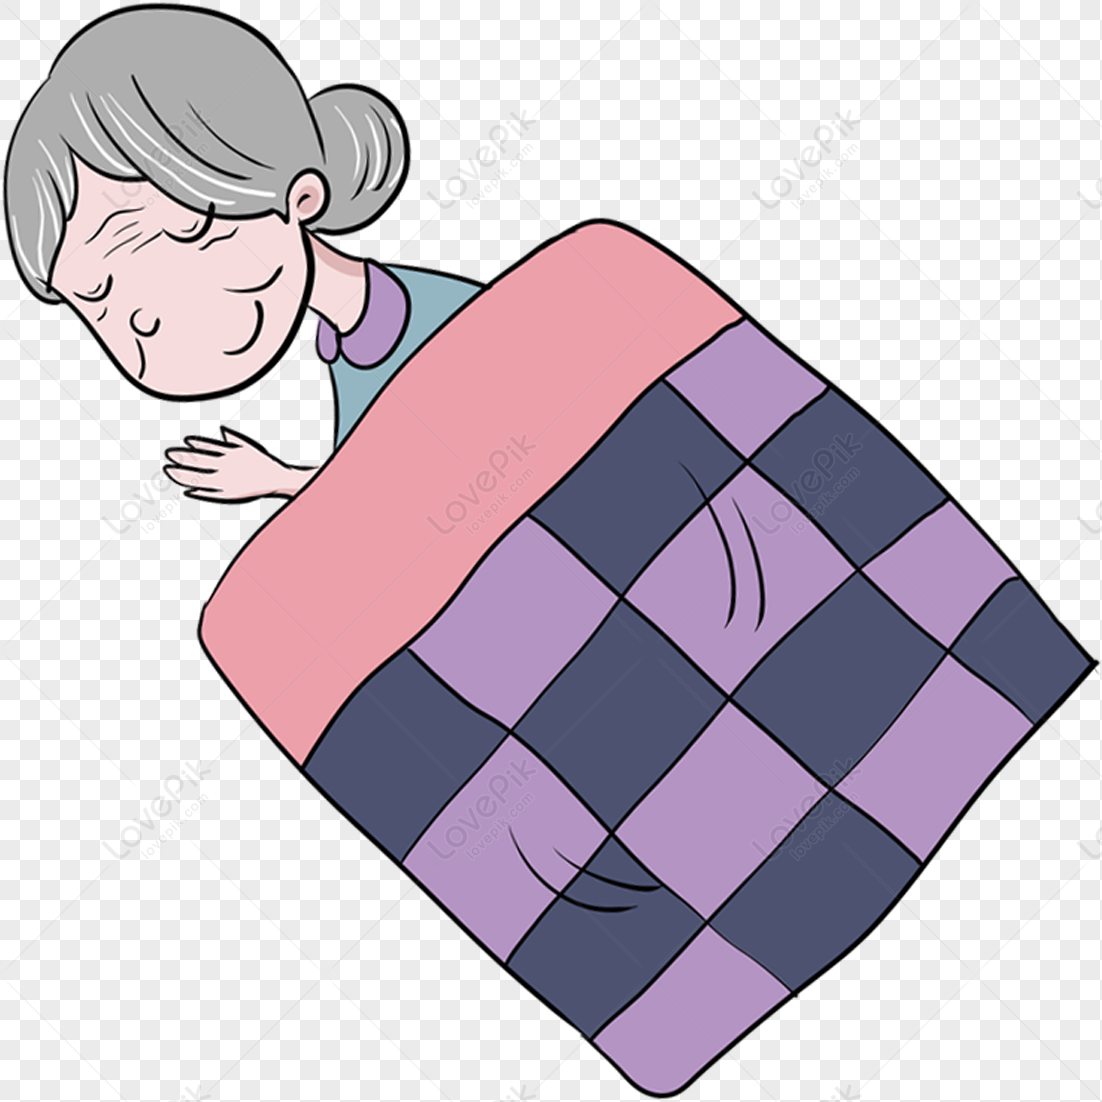 Old Lady Free PNG And Clipart Image For Free Download - Lovepik | 400528639